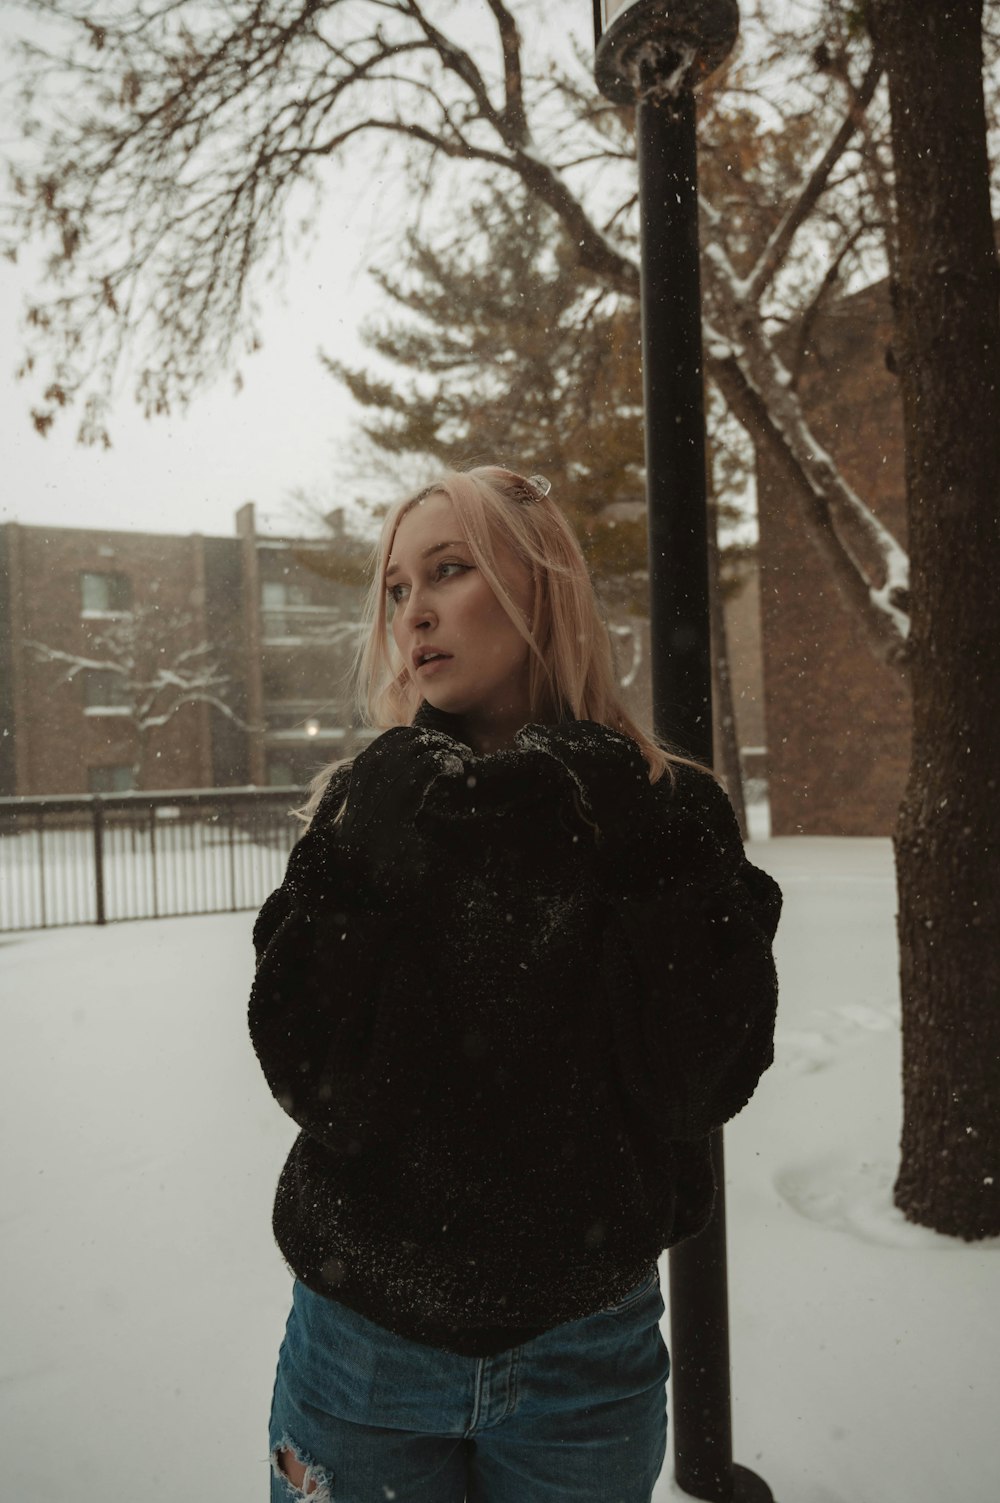 a woman standing next to a street light in the snow